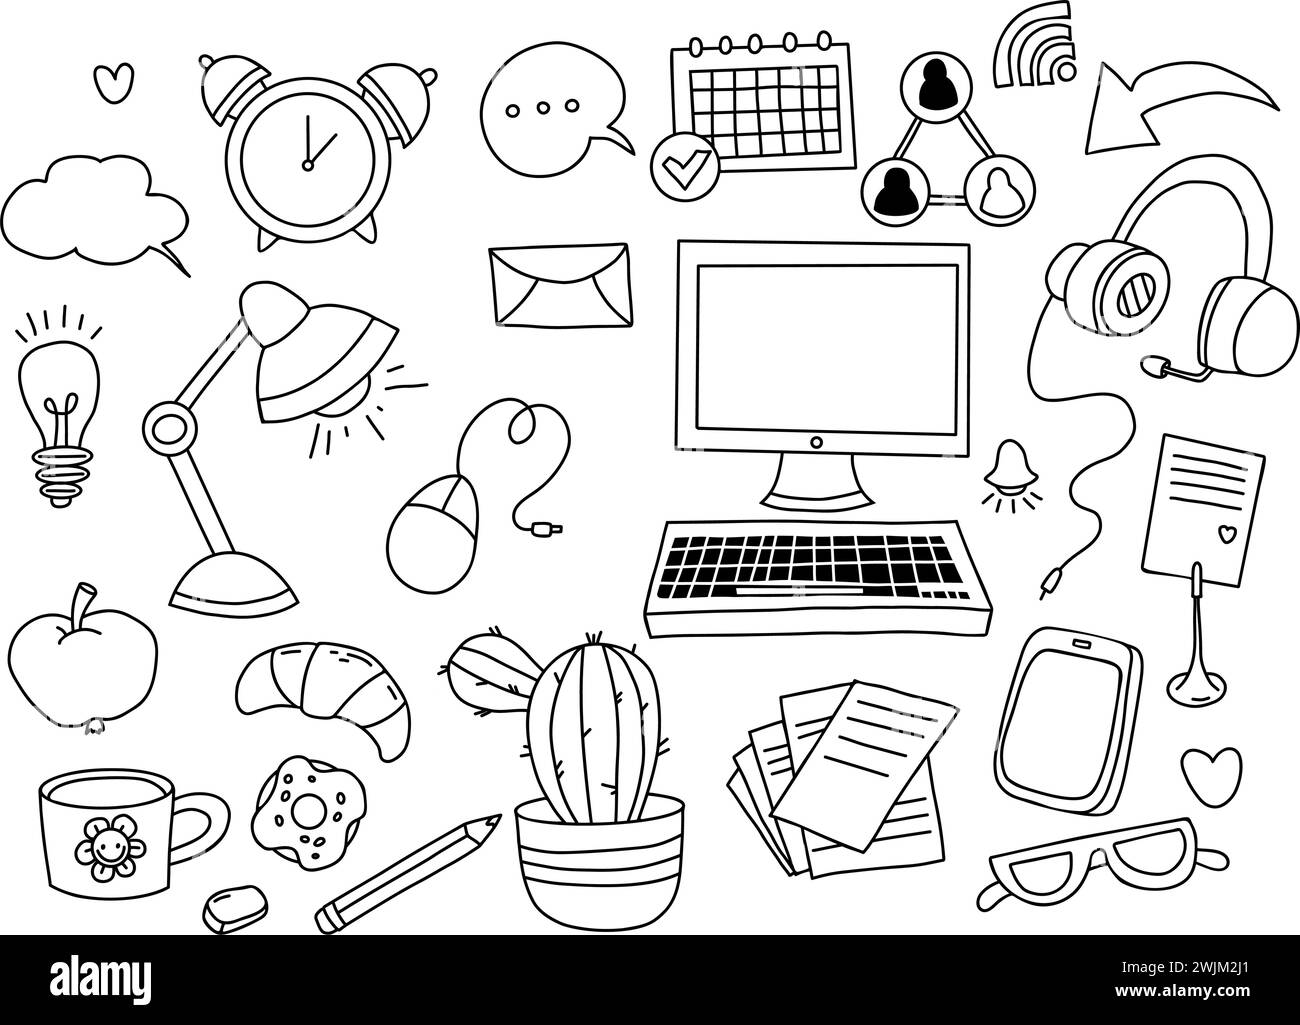 Business, work in office and home, technology and communication. Collection of linear hand doodles. Isolated vector outline drawings on white backgrou Stock Vector